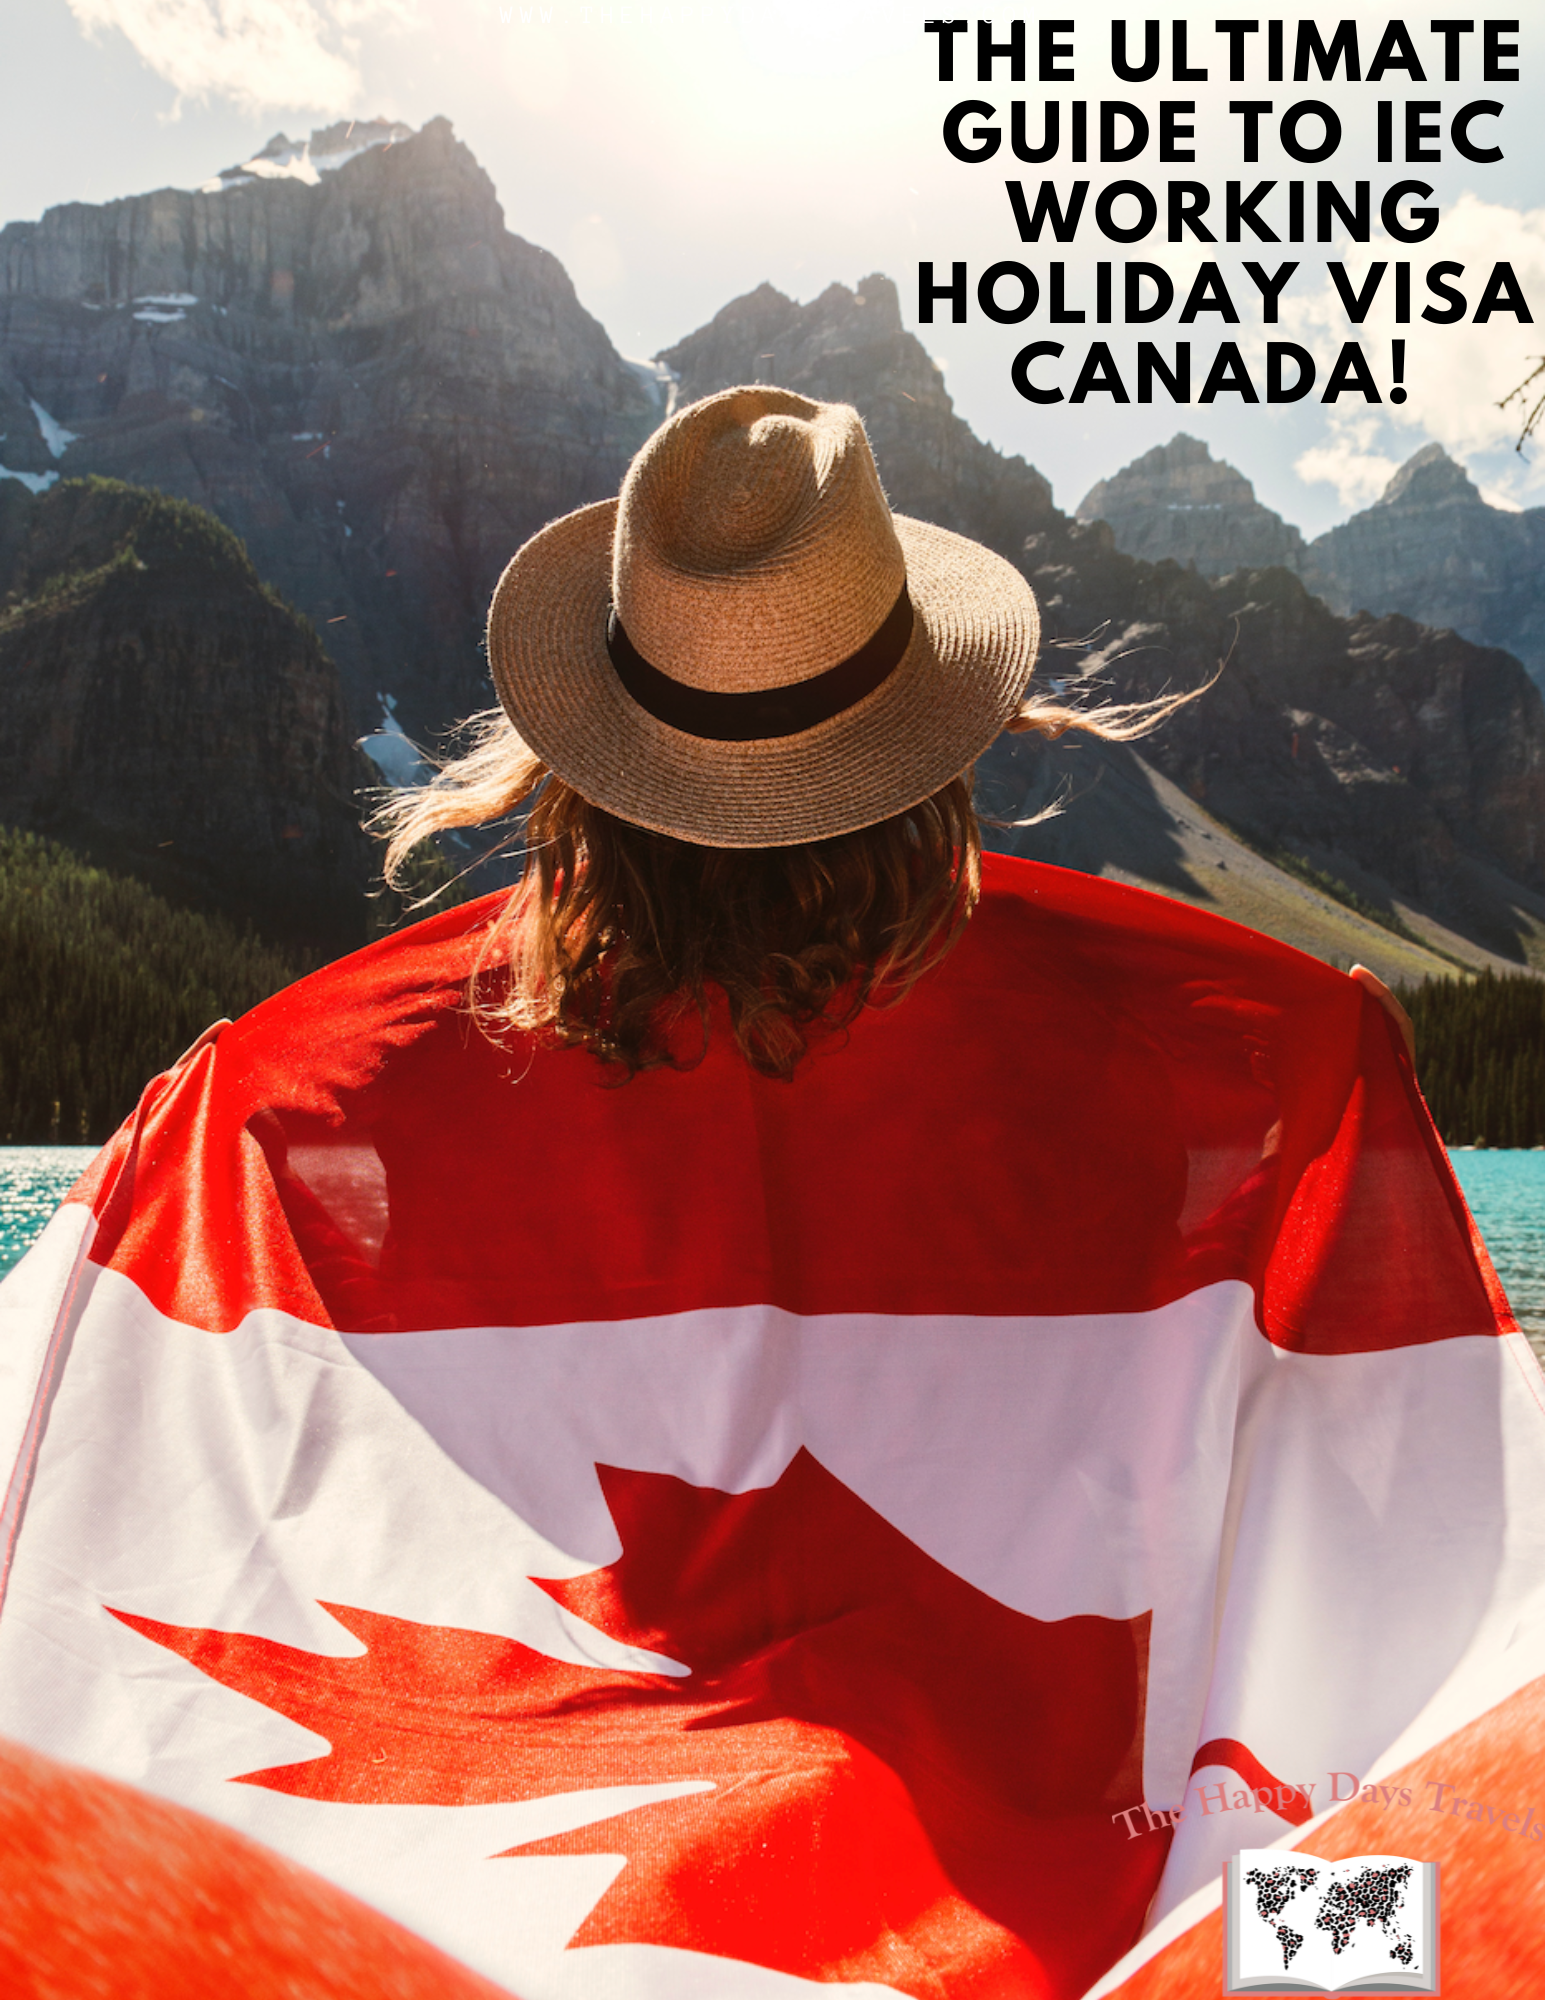 Pin image text is 'the ultimate guide to IEC working holiday visa Canada' with image of Canada flag on a woman's back